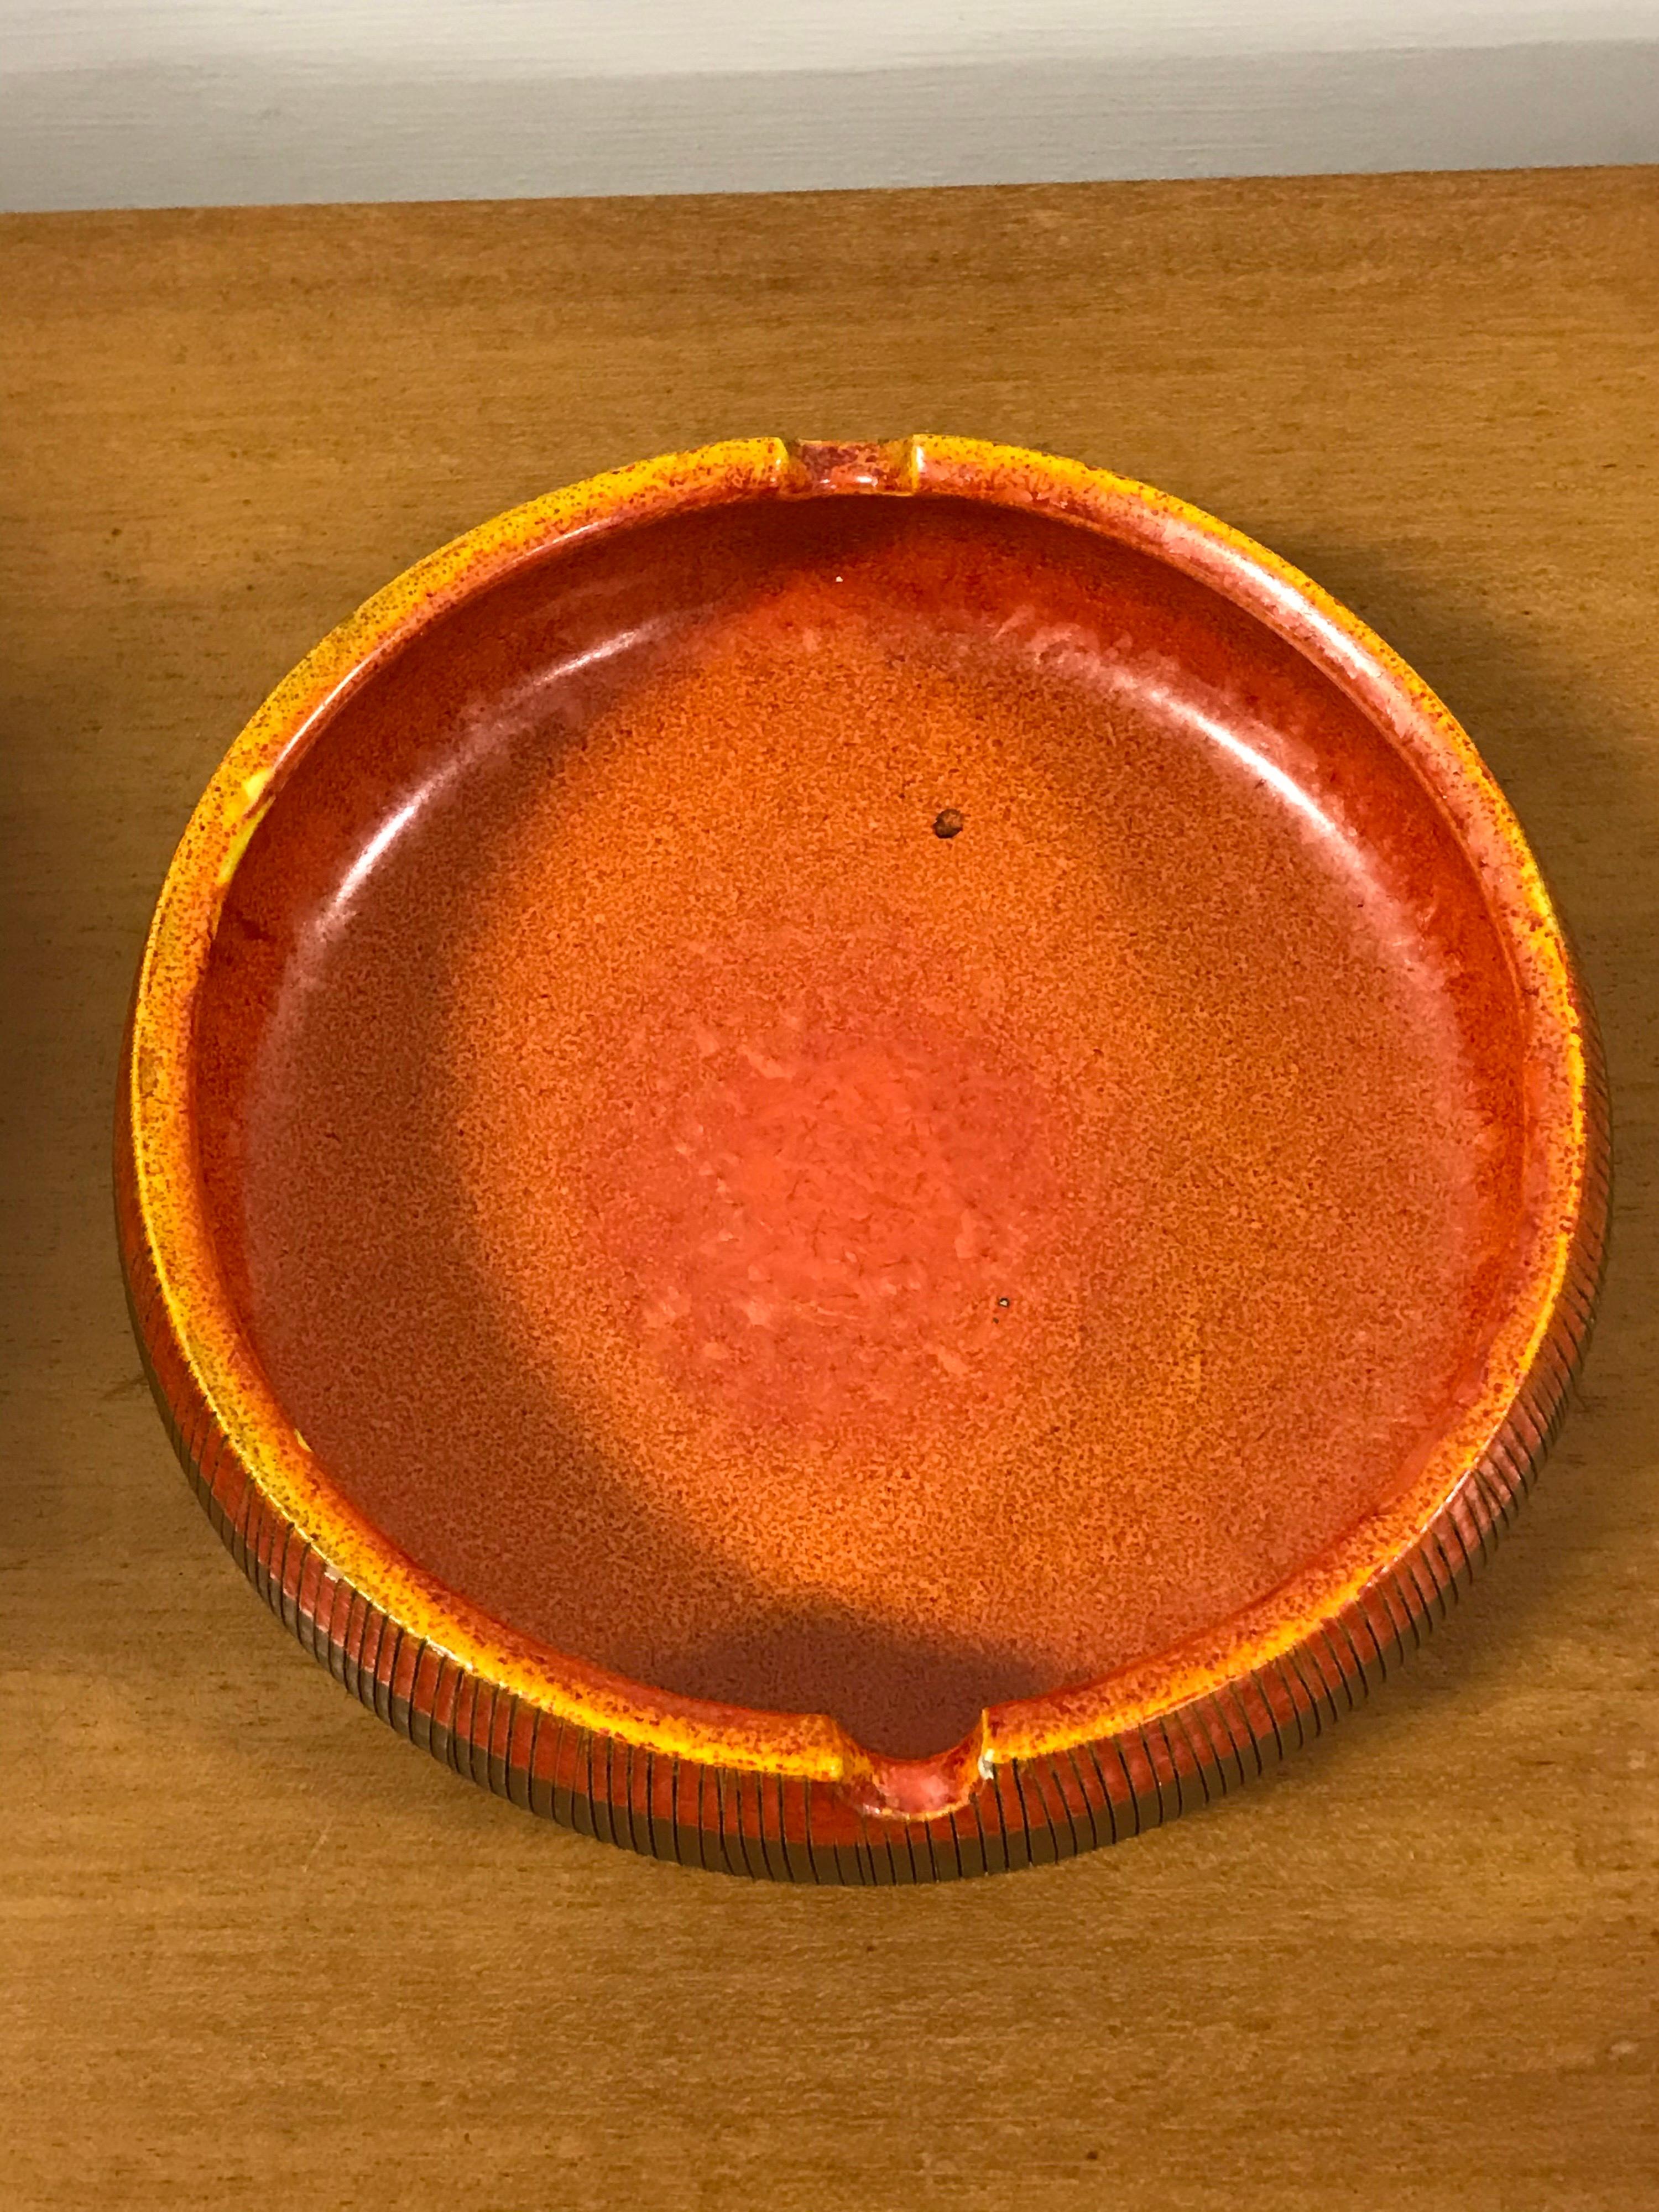 Aldo Londi for Bitossi Large Ashtray or Catchall, Italian Ceramic In Good Condition For Sale In St.Petersburg, FL